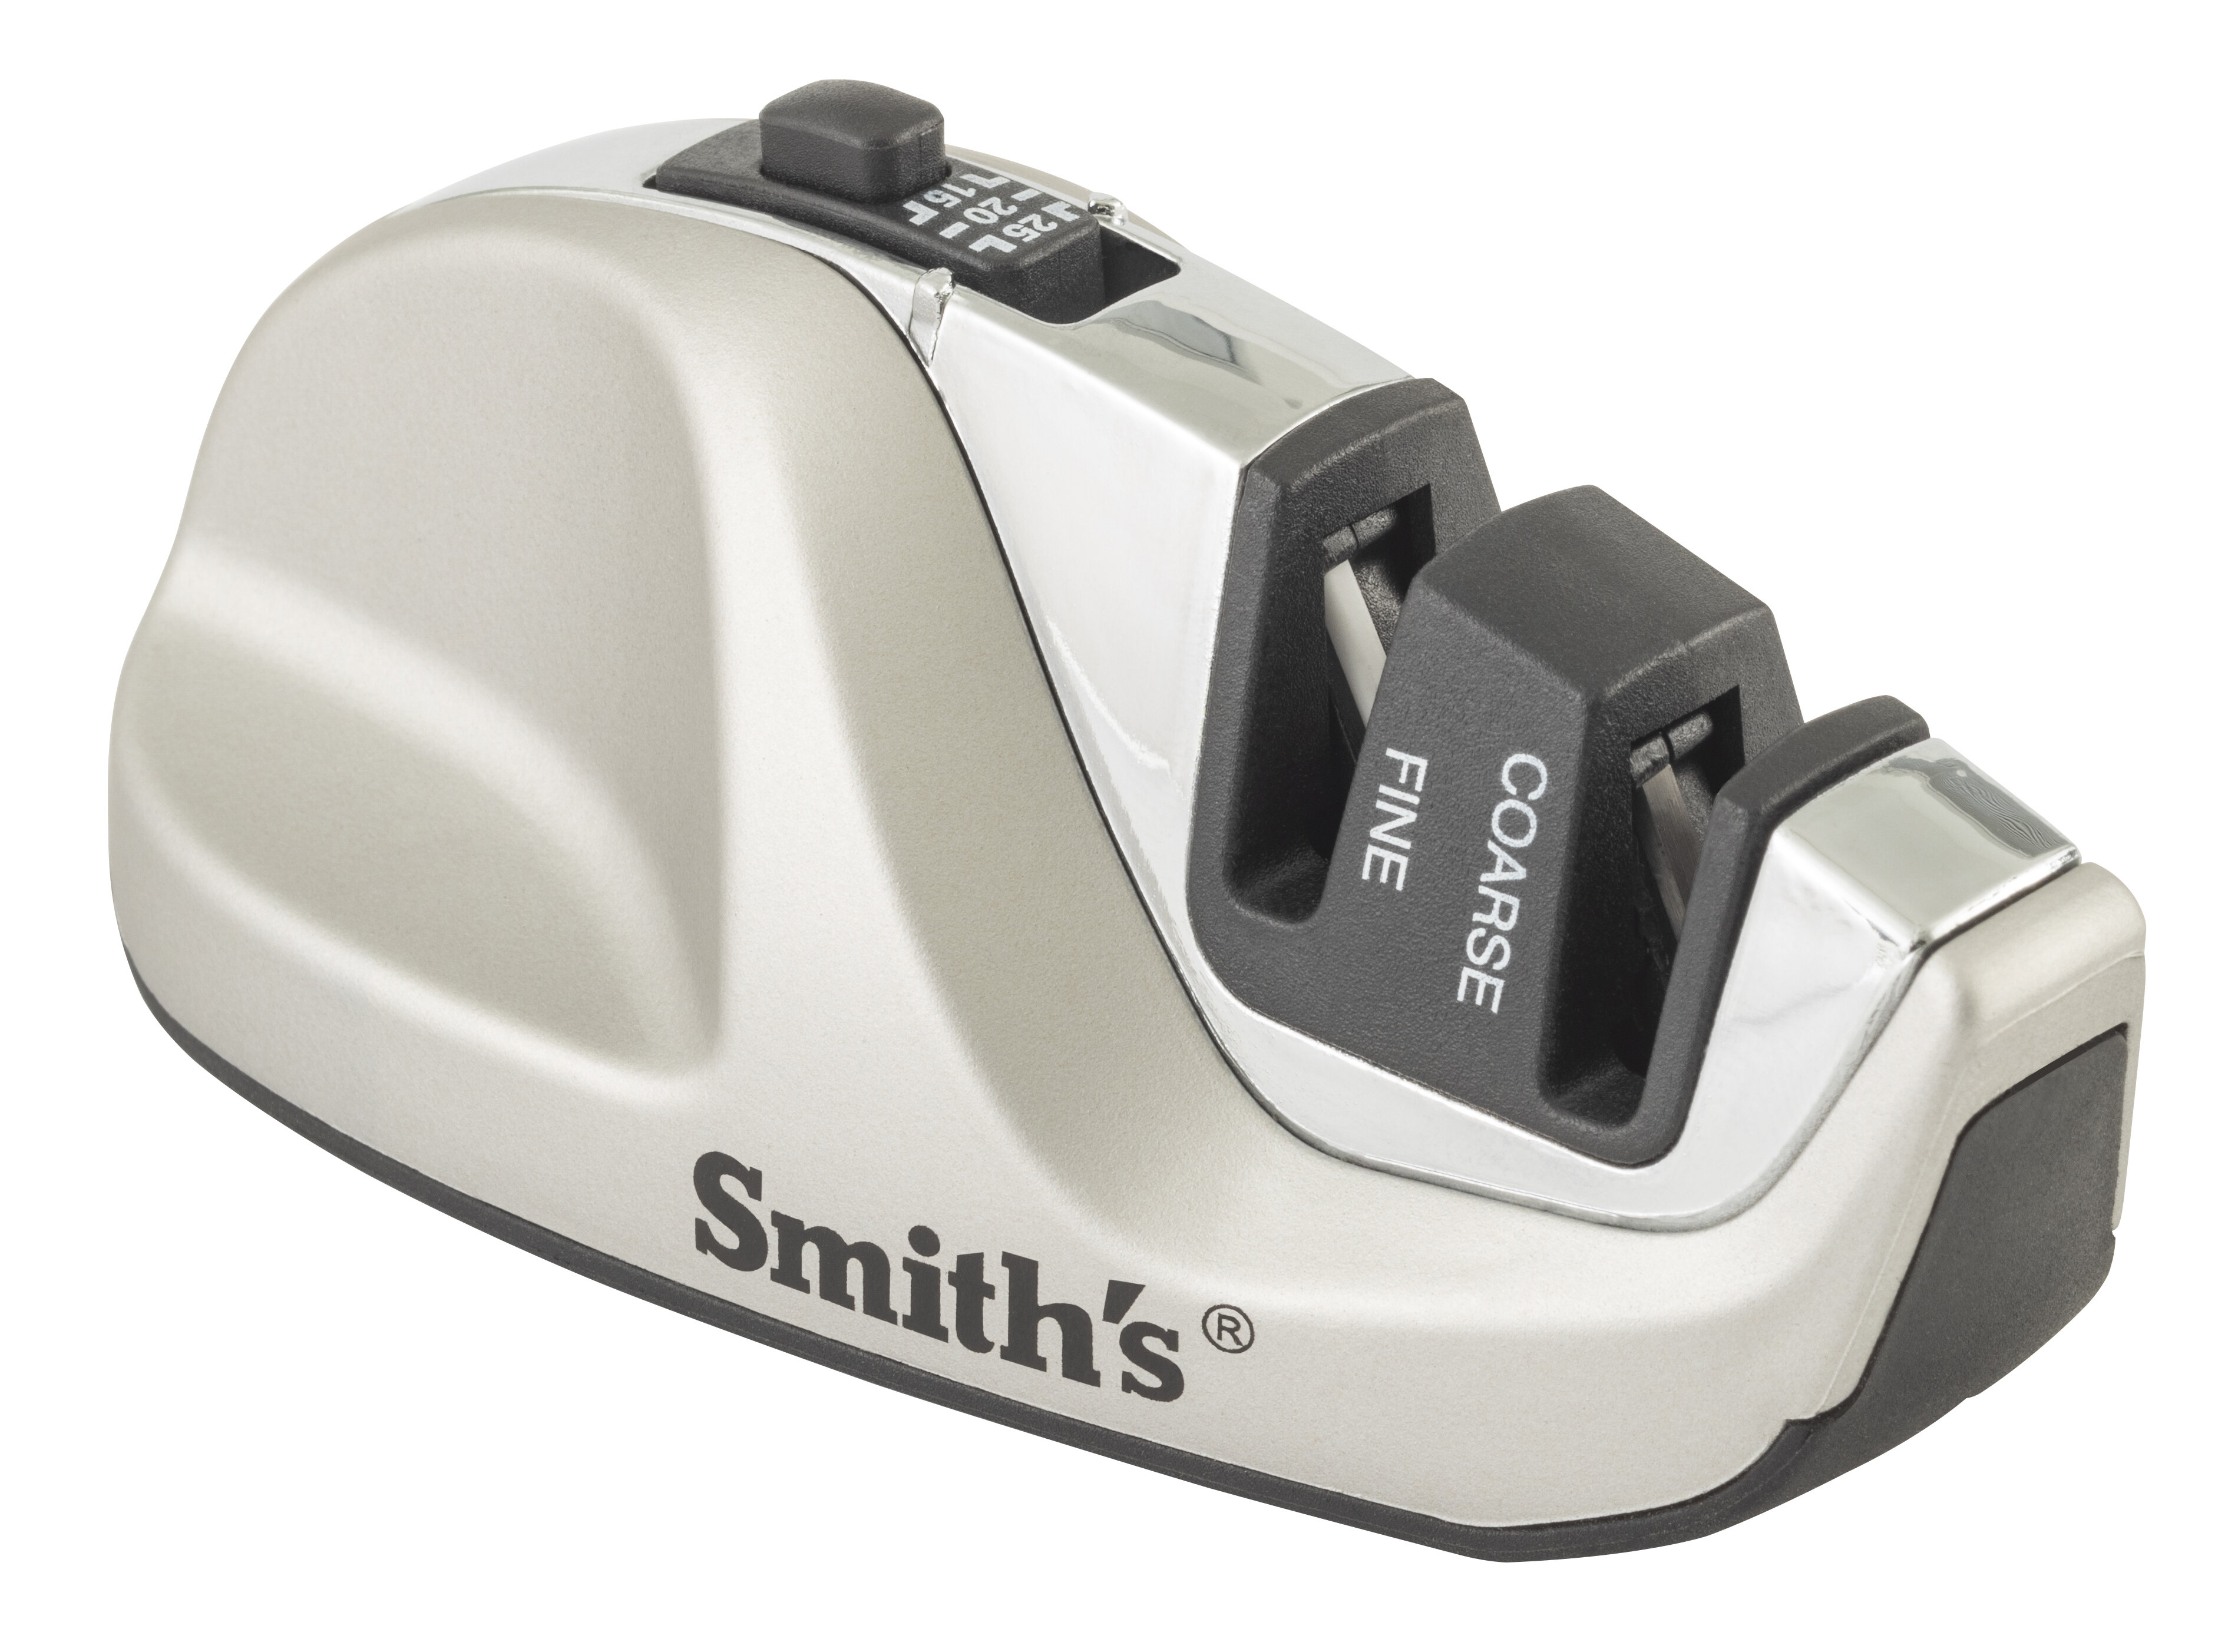 Smiths Edge Pro Compact Electric Knife Sharpener 50005 for sale